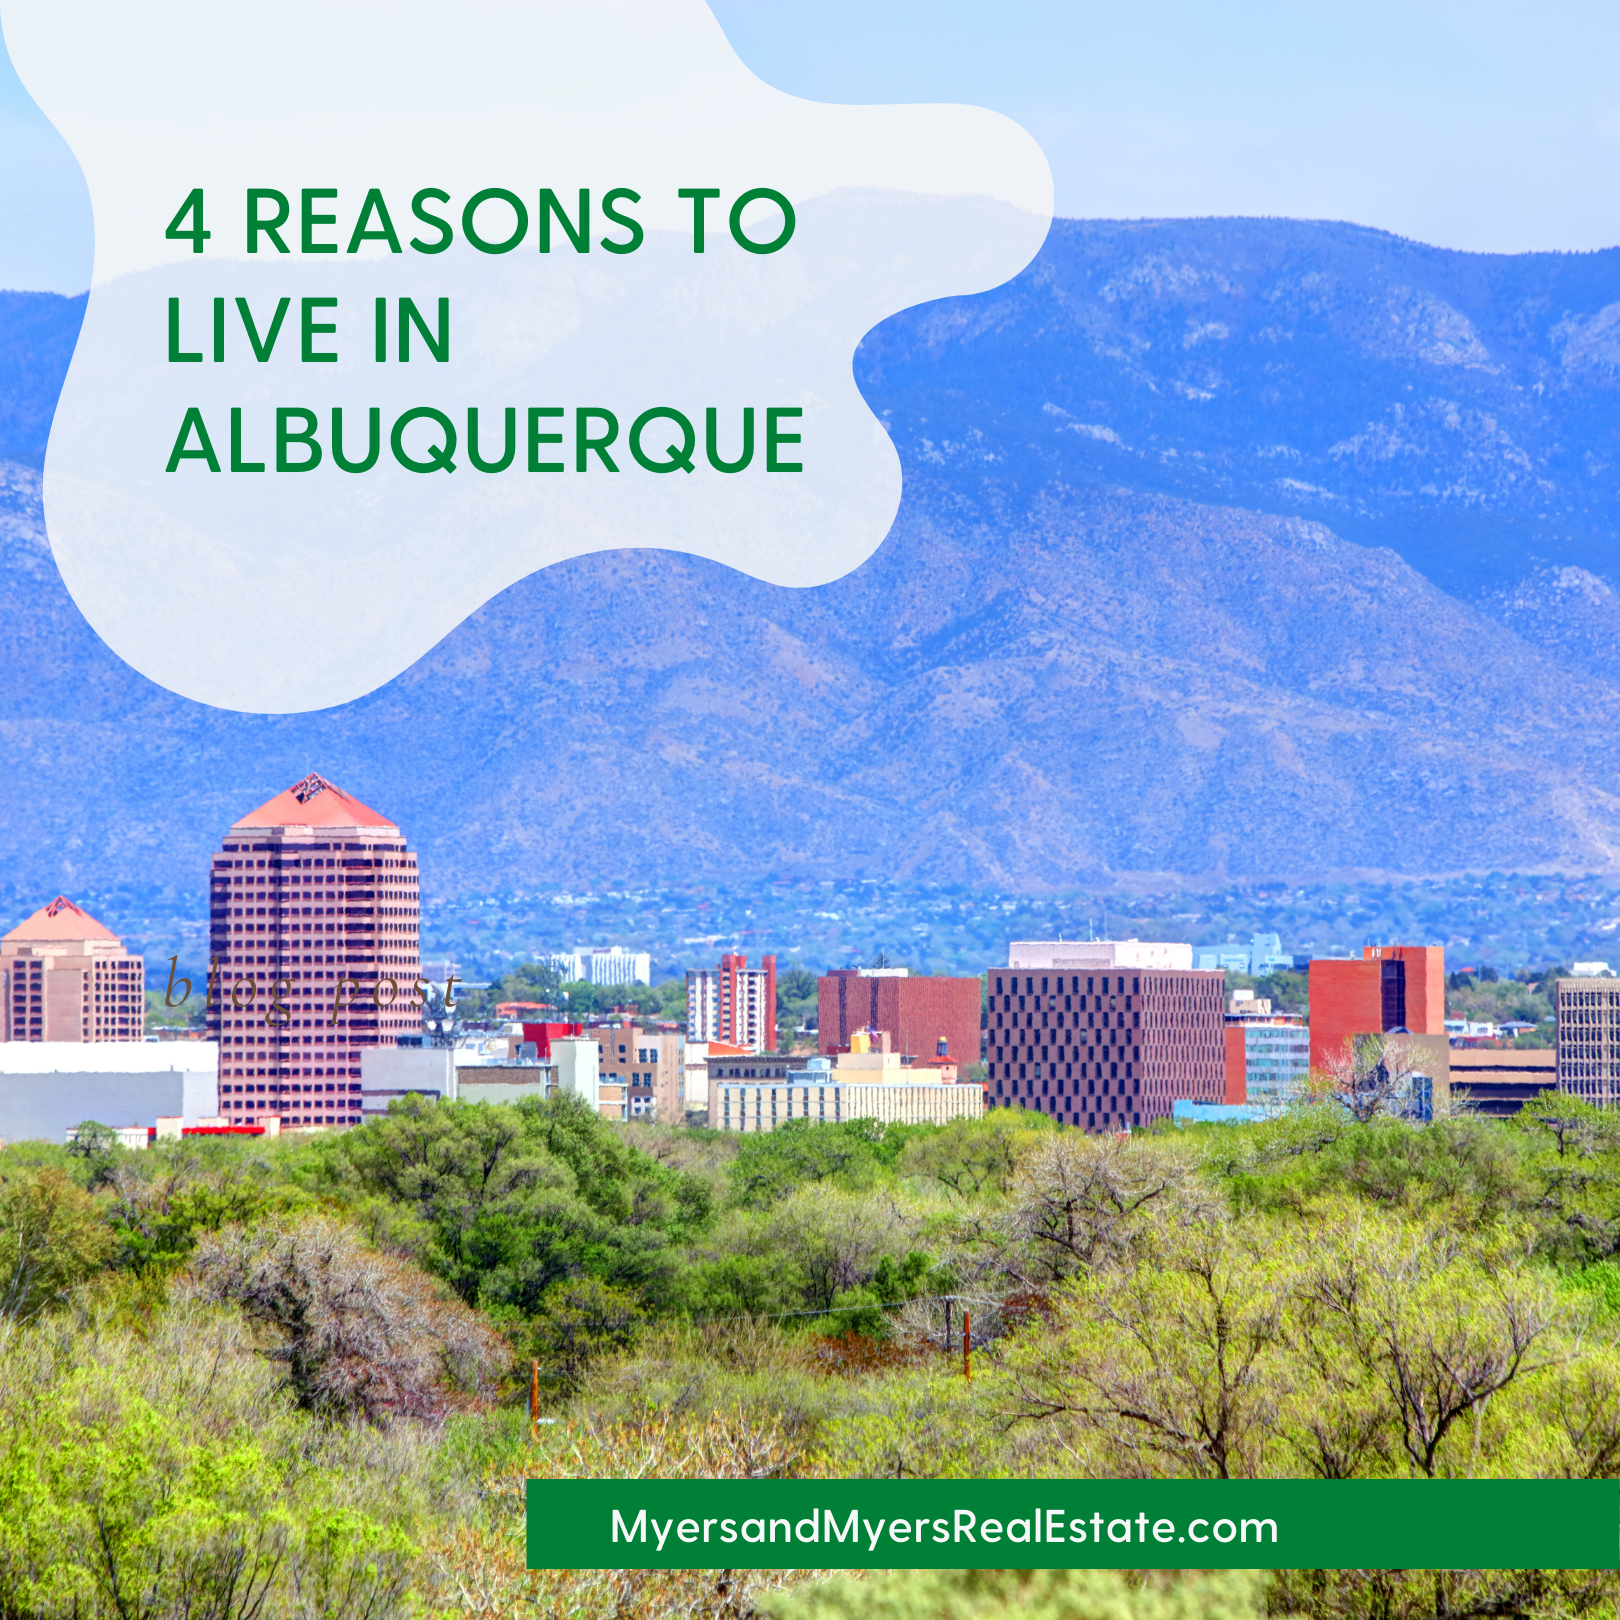 4 Reasons to Live in Albuquerque